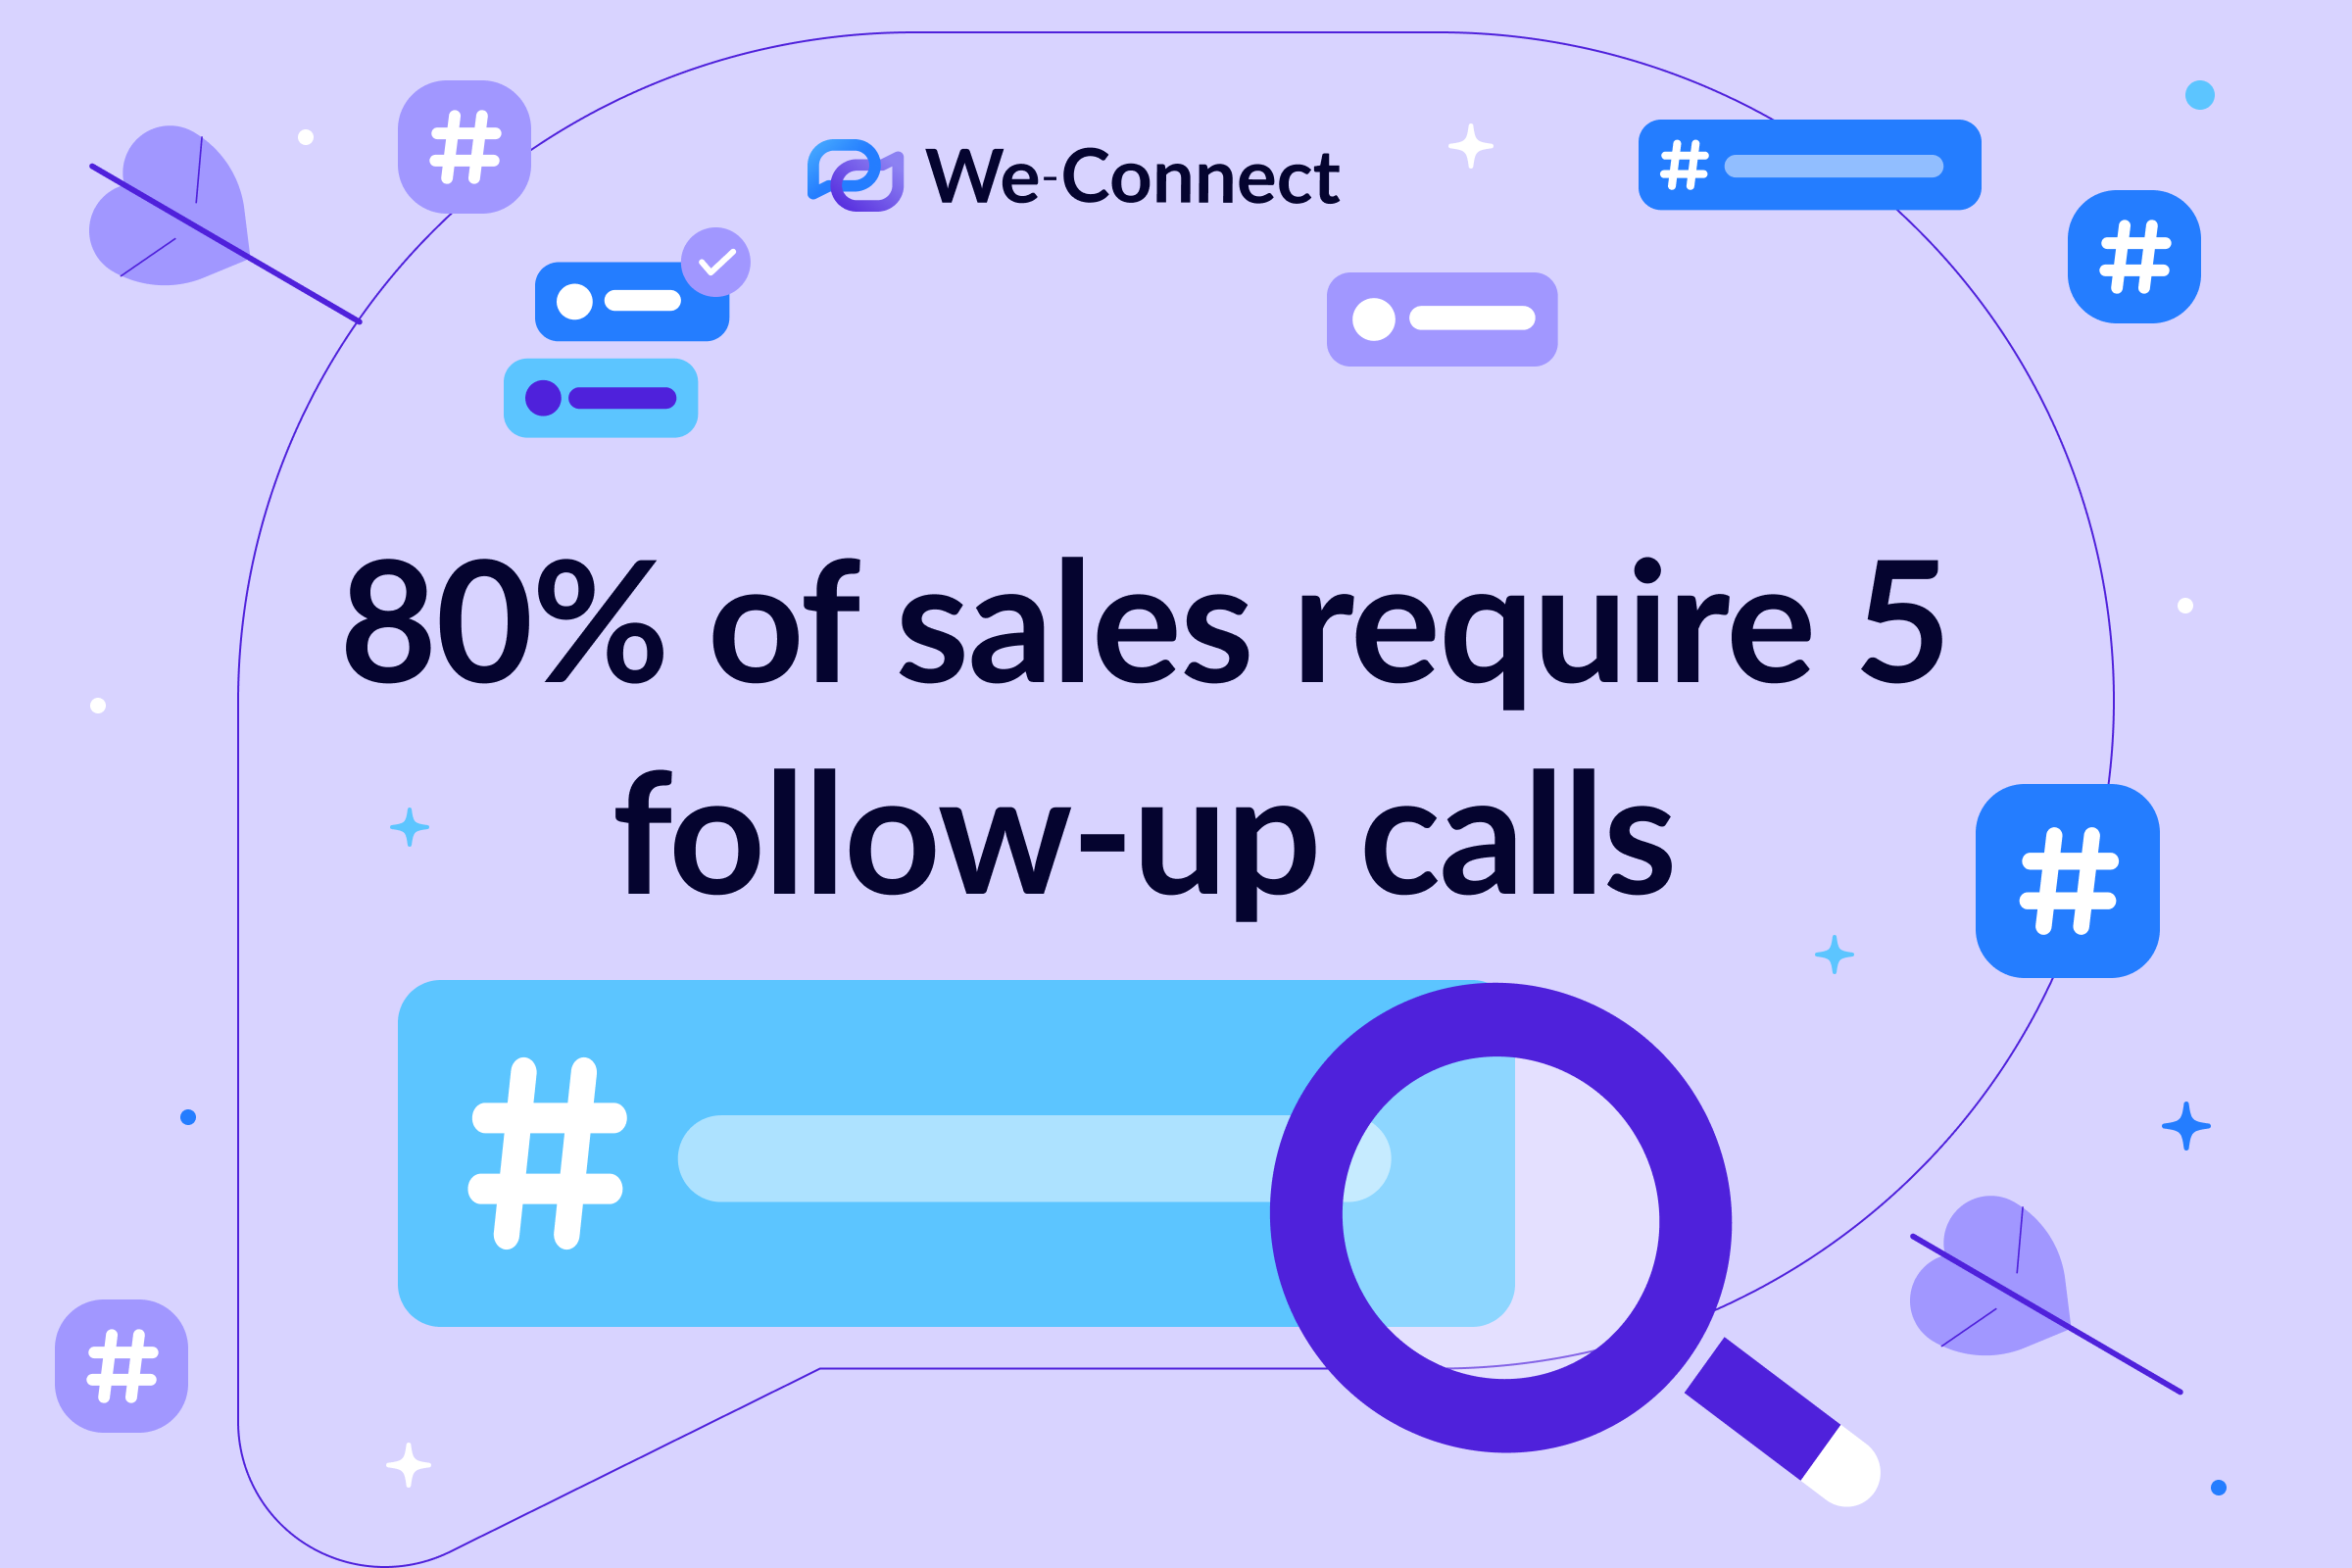 80% of sales require 5 follow-up calls